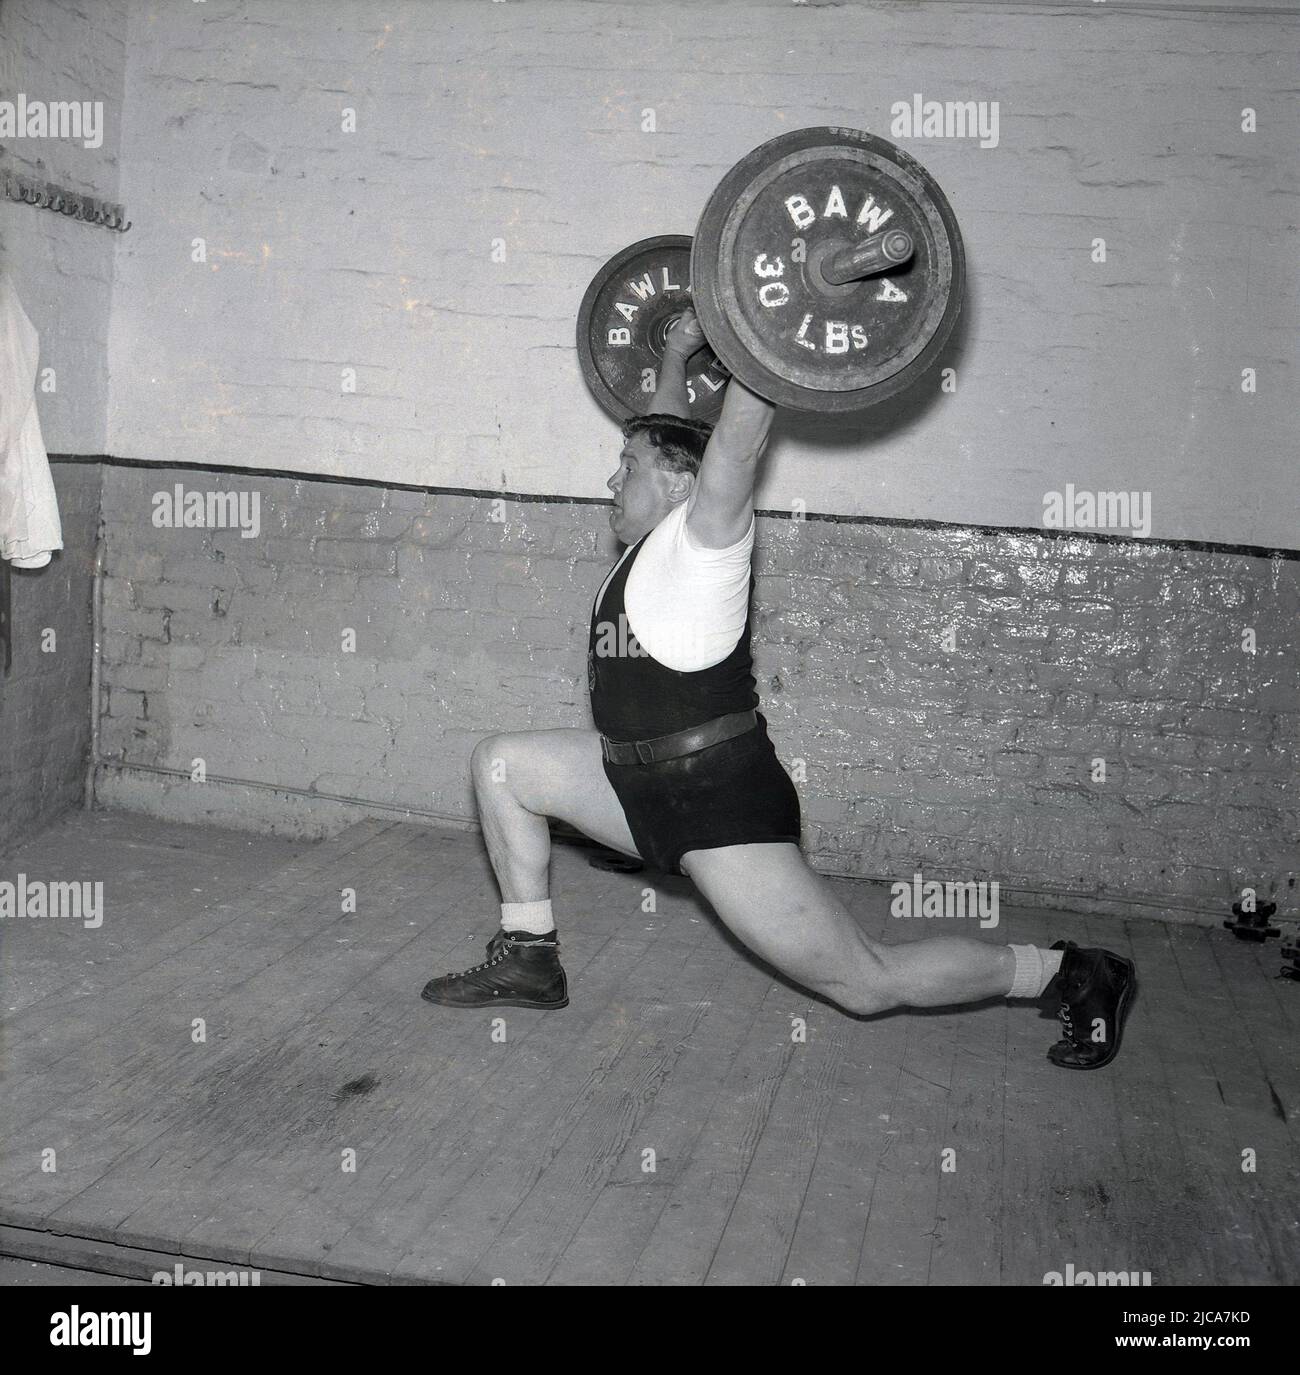 1957, historical, weight-lifting, inside a gym on a wooden board, a male weightlifter training, lifting the barbell doing the clean-and-jerk, Stockport, Manchester, England, UK. On the barbell is 60lbs. The clean-and-jerk is one of the two lifts in competitive or Olympic-style weightlifting. He is wearing weightlifting shoes and the traditional leather weightlifting belt. On the barbell, a logo with the initials BAWLA, the British Amateur Weightlifting Association, named as such in 1911 after being founded in 1910 as the BWLA. Stock Photo